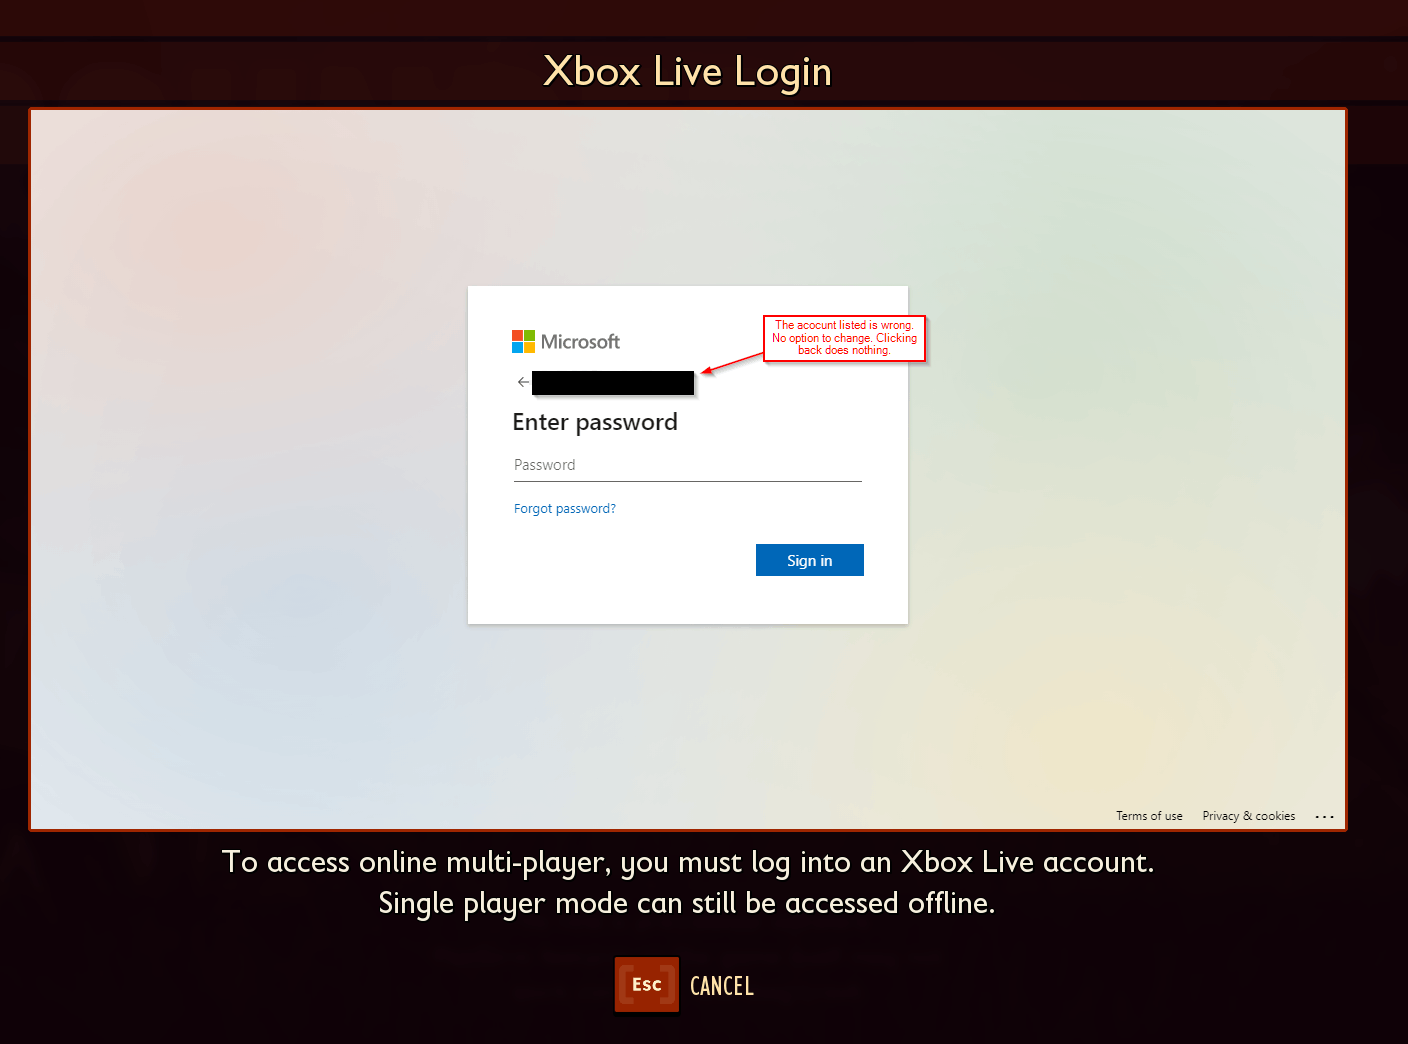 i cannot download game grounded in xbox game pass pc app. it has error -  Microsoft Community